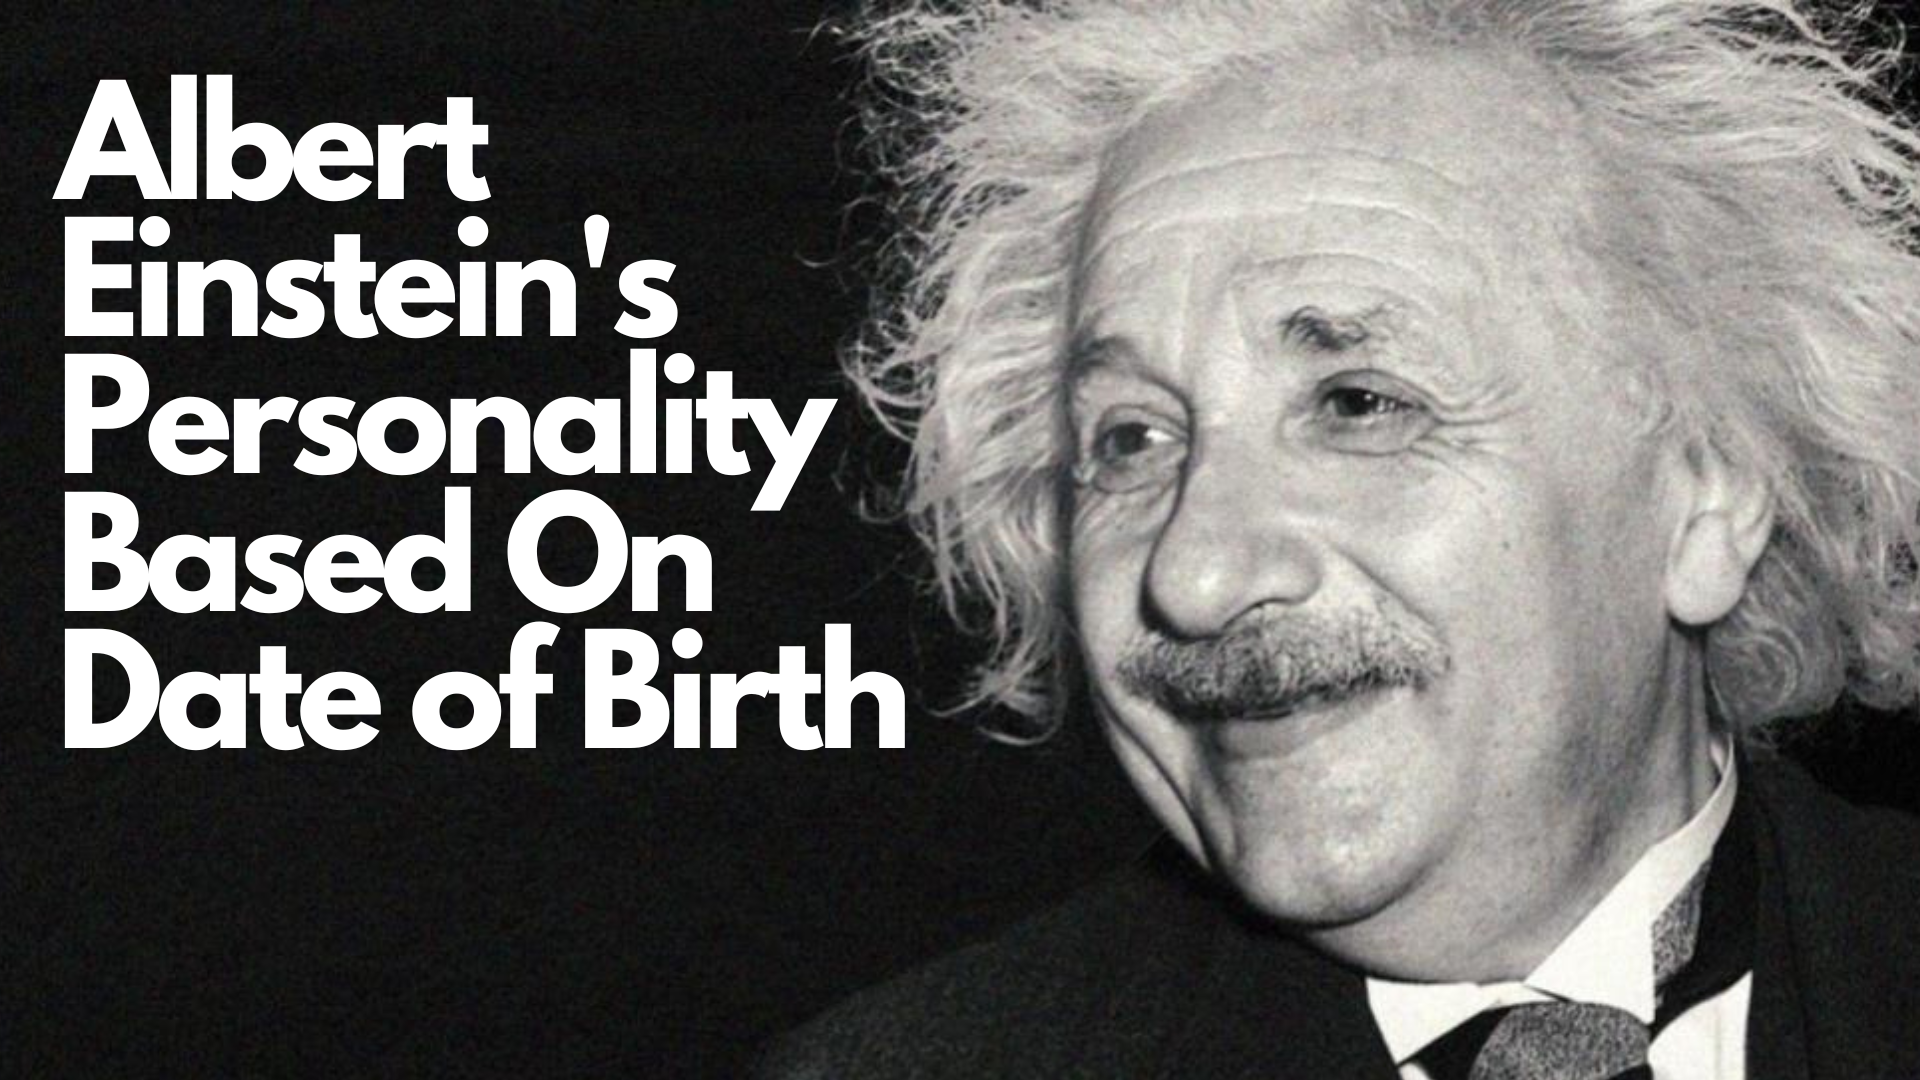 Albert Einstein smiling and looks happy with words Albert Einstein's Personality Based On Date of Birth